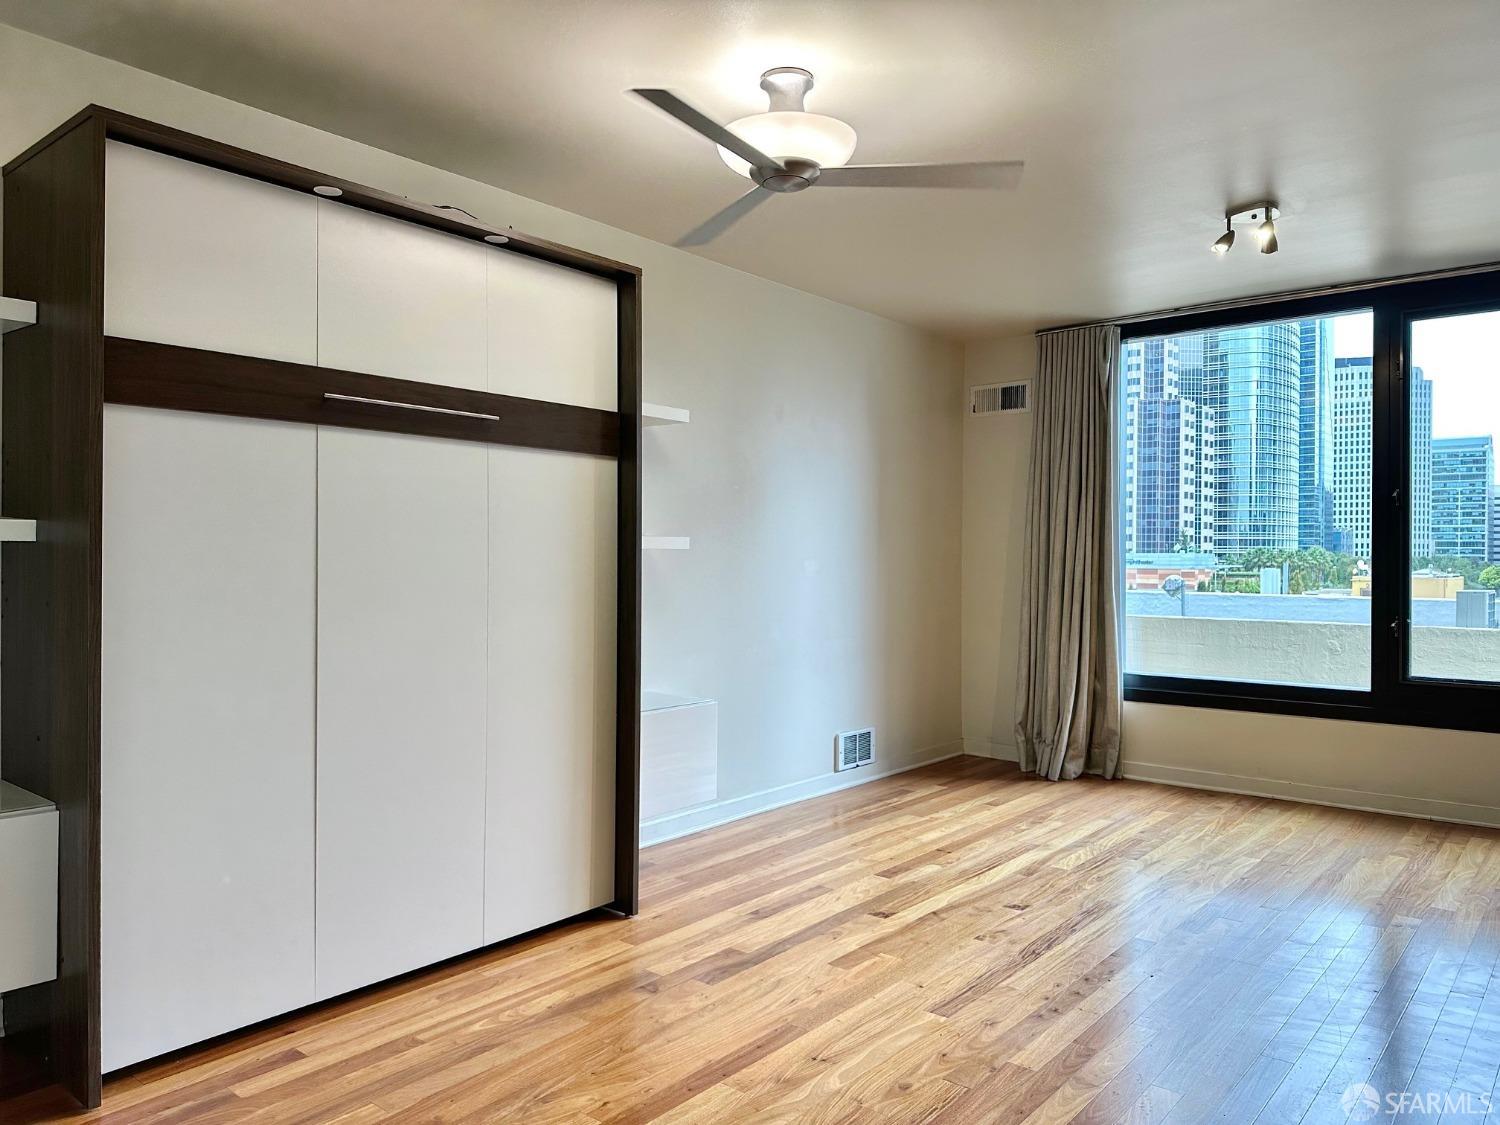 Photo of 199 New Montgomery St #1011 in San Francisco, CA